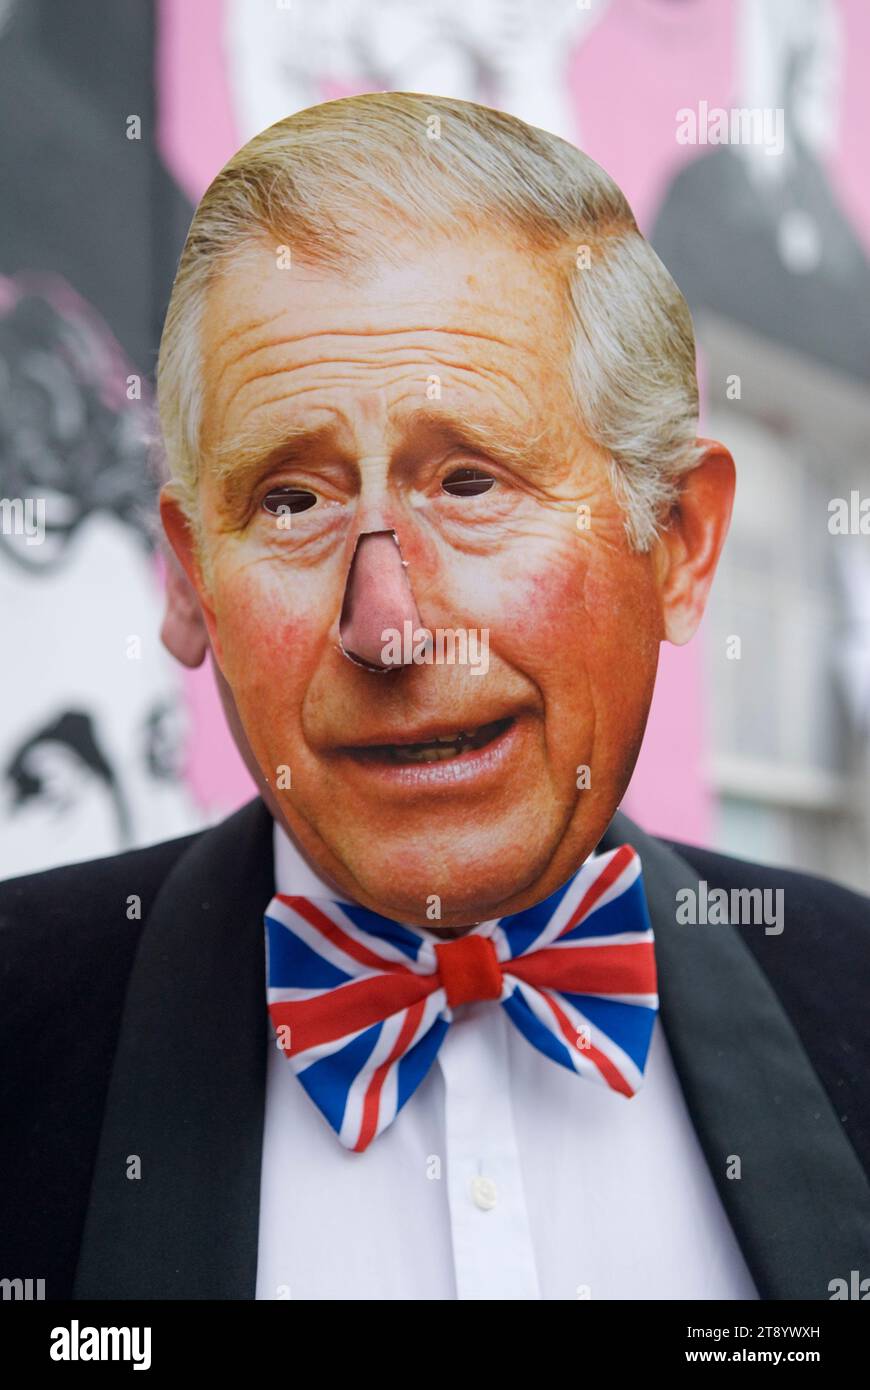 Prince Charles mask London UK. Fancy dress party for the Queen Elizabeth II Diamond Jubilee.  2012 2010s England HOMER SYKES Stock Photo